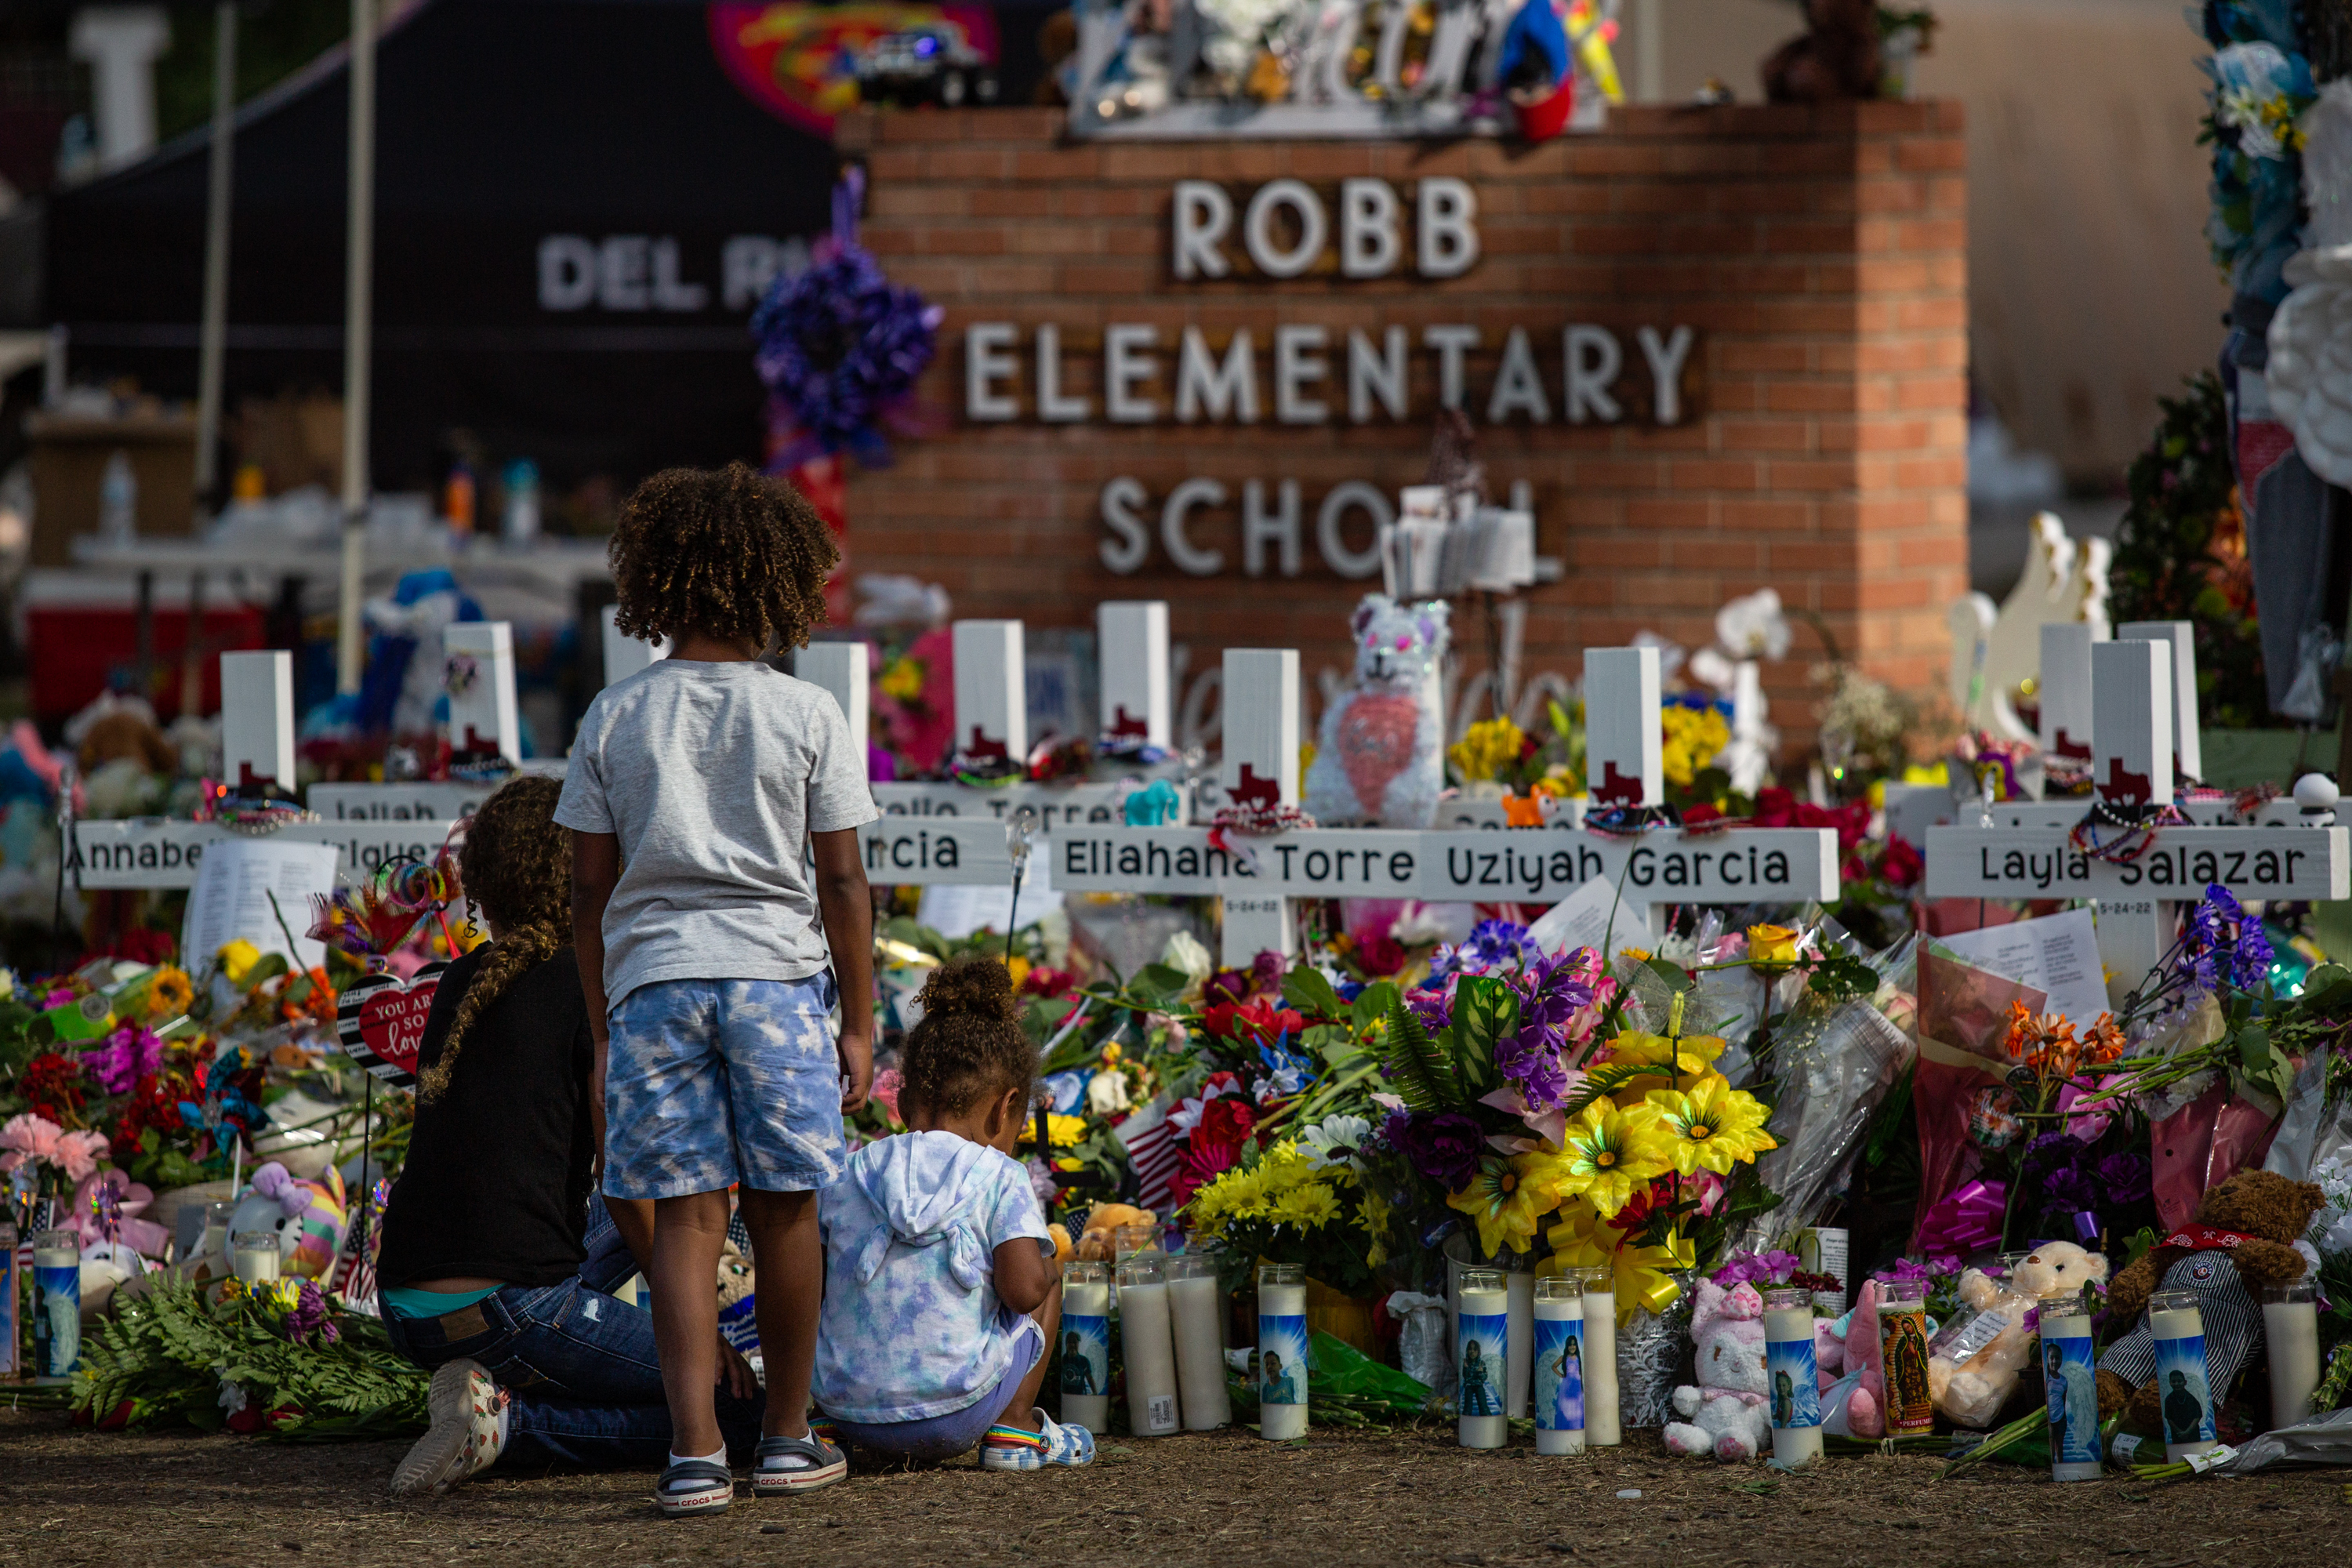 Hundreds wait in line holding flowers and each other to pay their respects at a memorial in front of the Robb Elementary School on Saturday evening.